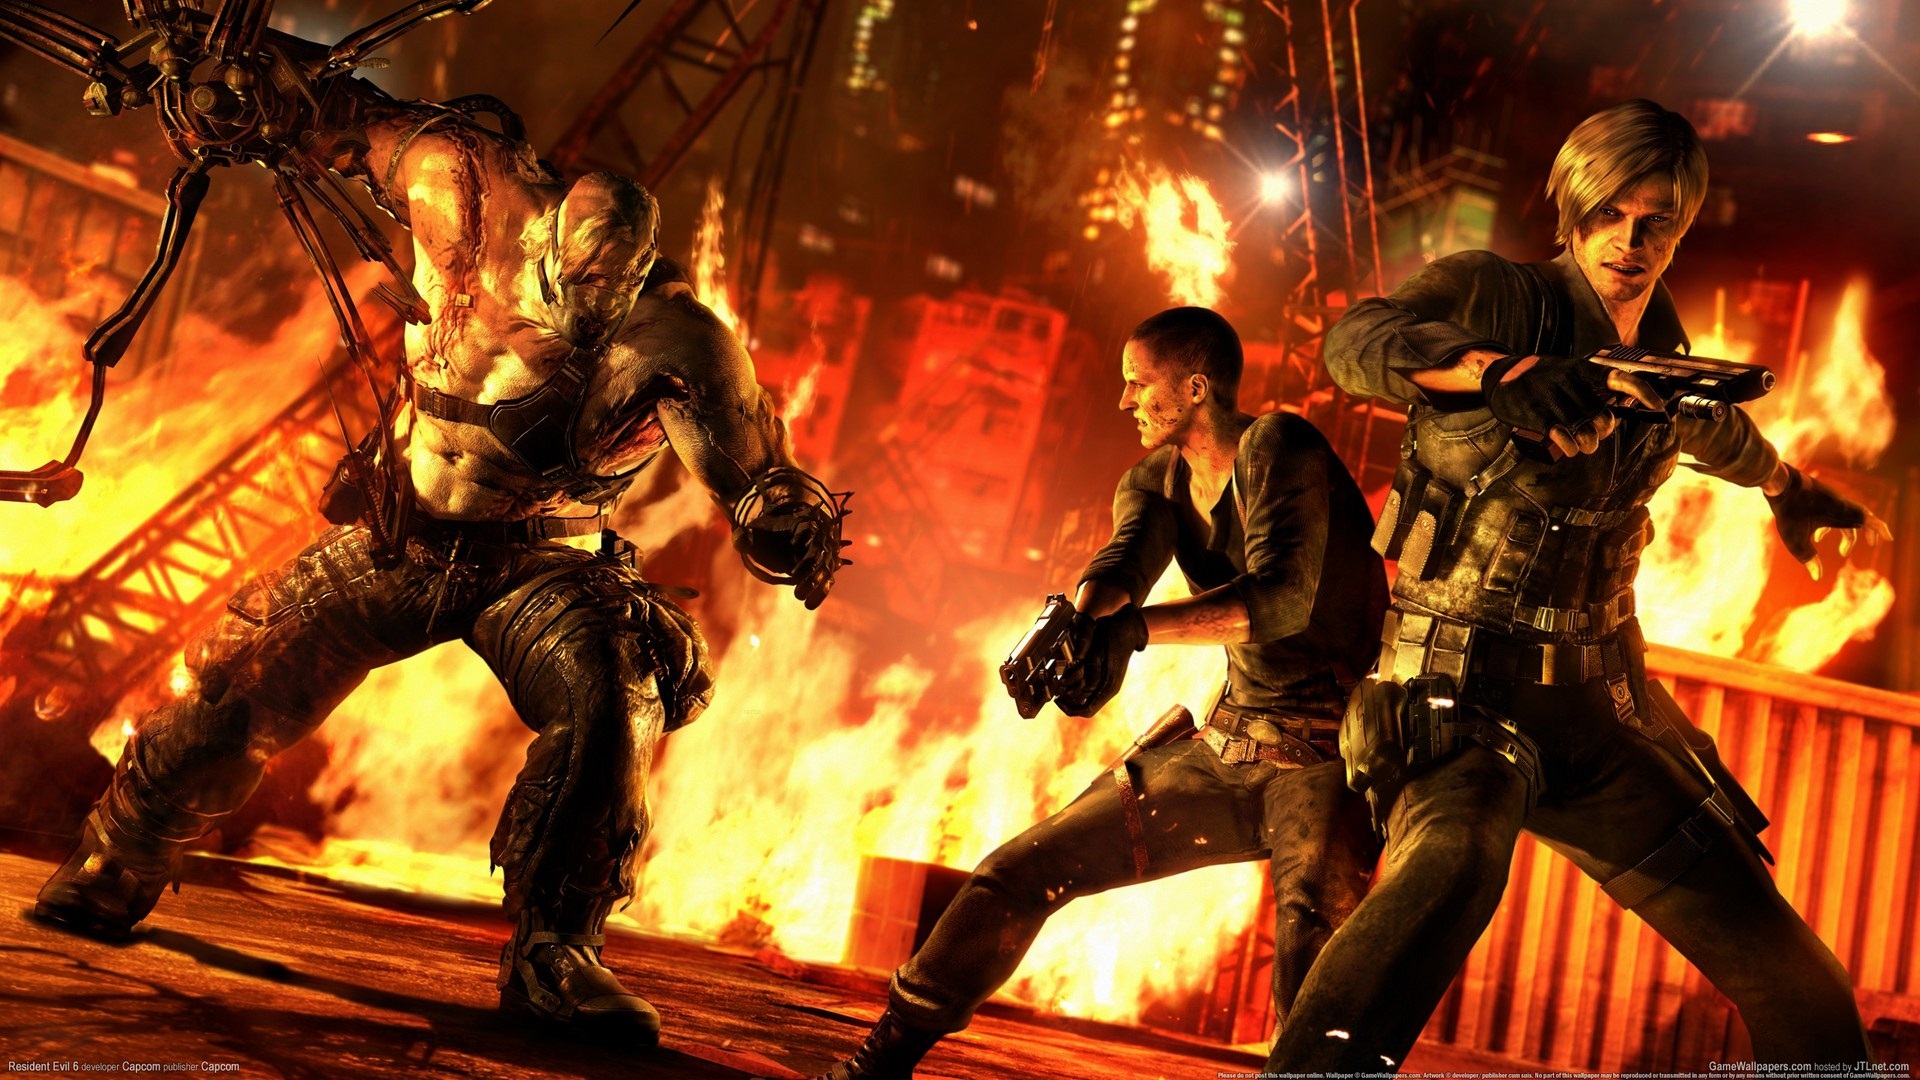 Resident Evil 6 HD game wallpapers #15 - 1920x1080